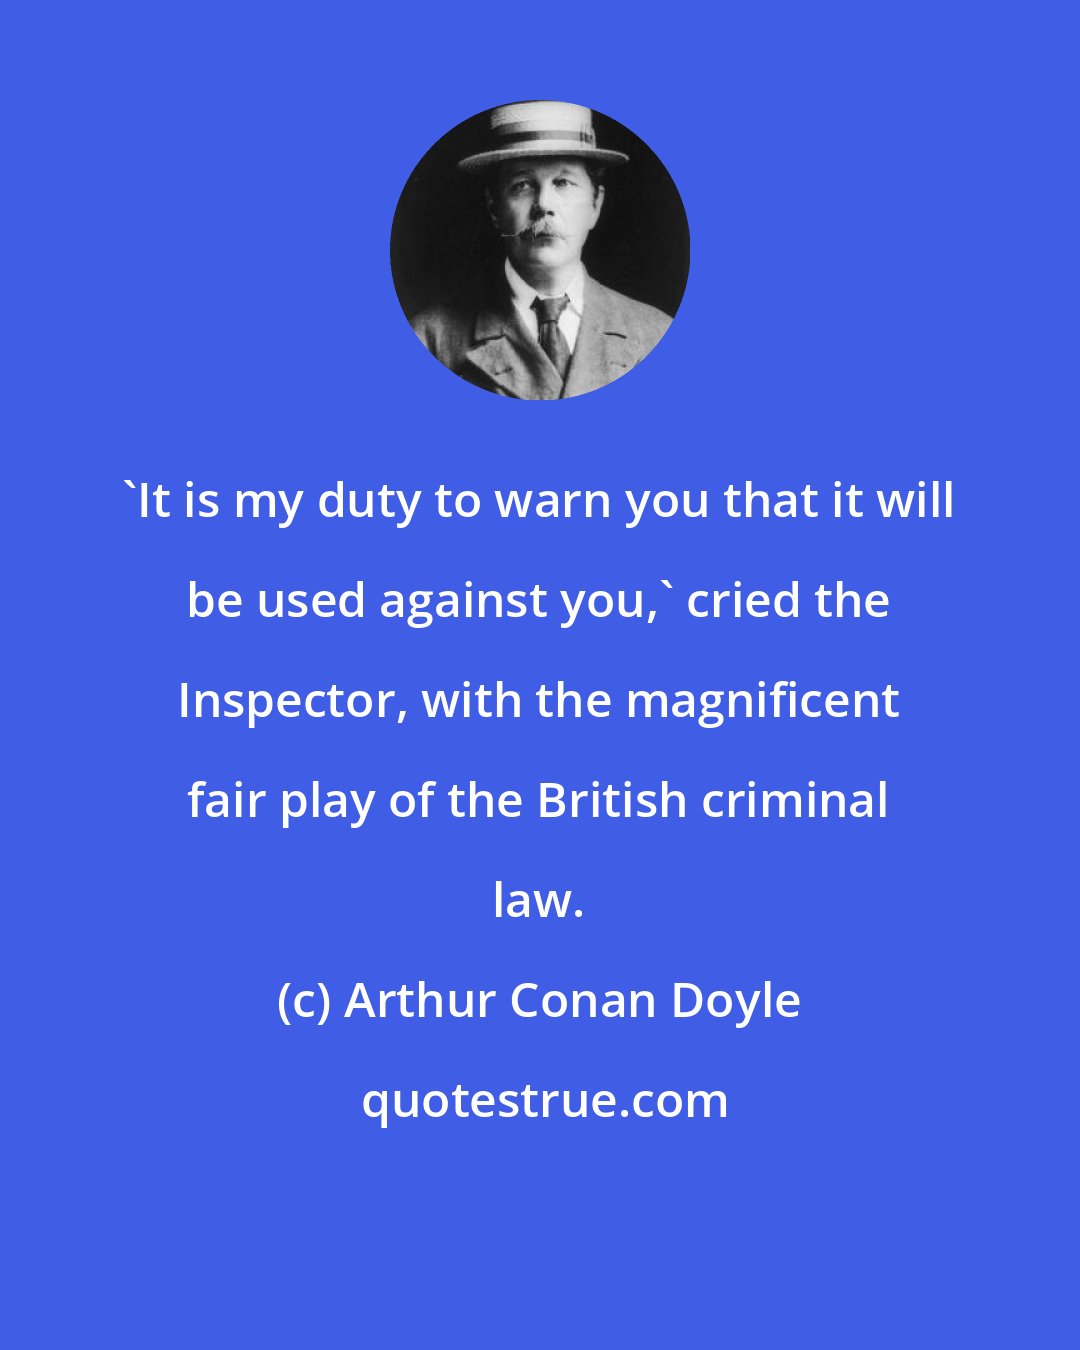 Arthur Conan Doyle: 'It is my duty to warn you that it will be used against you,' cried the Inspector, with the magnificent fair play of the British criminal law.